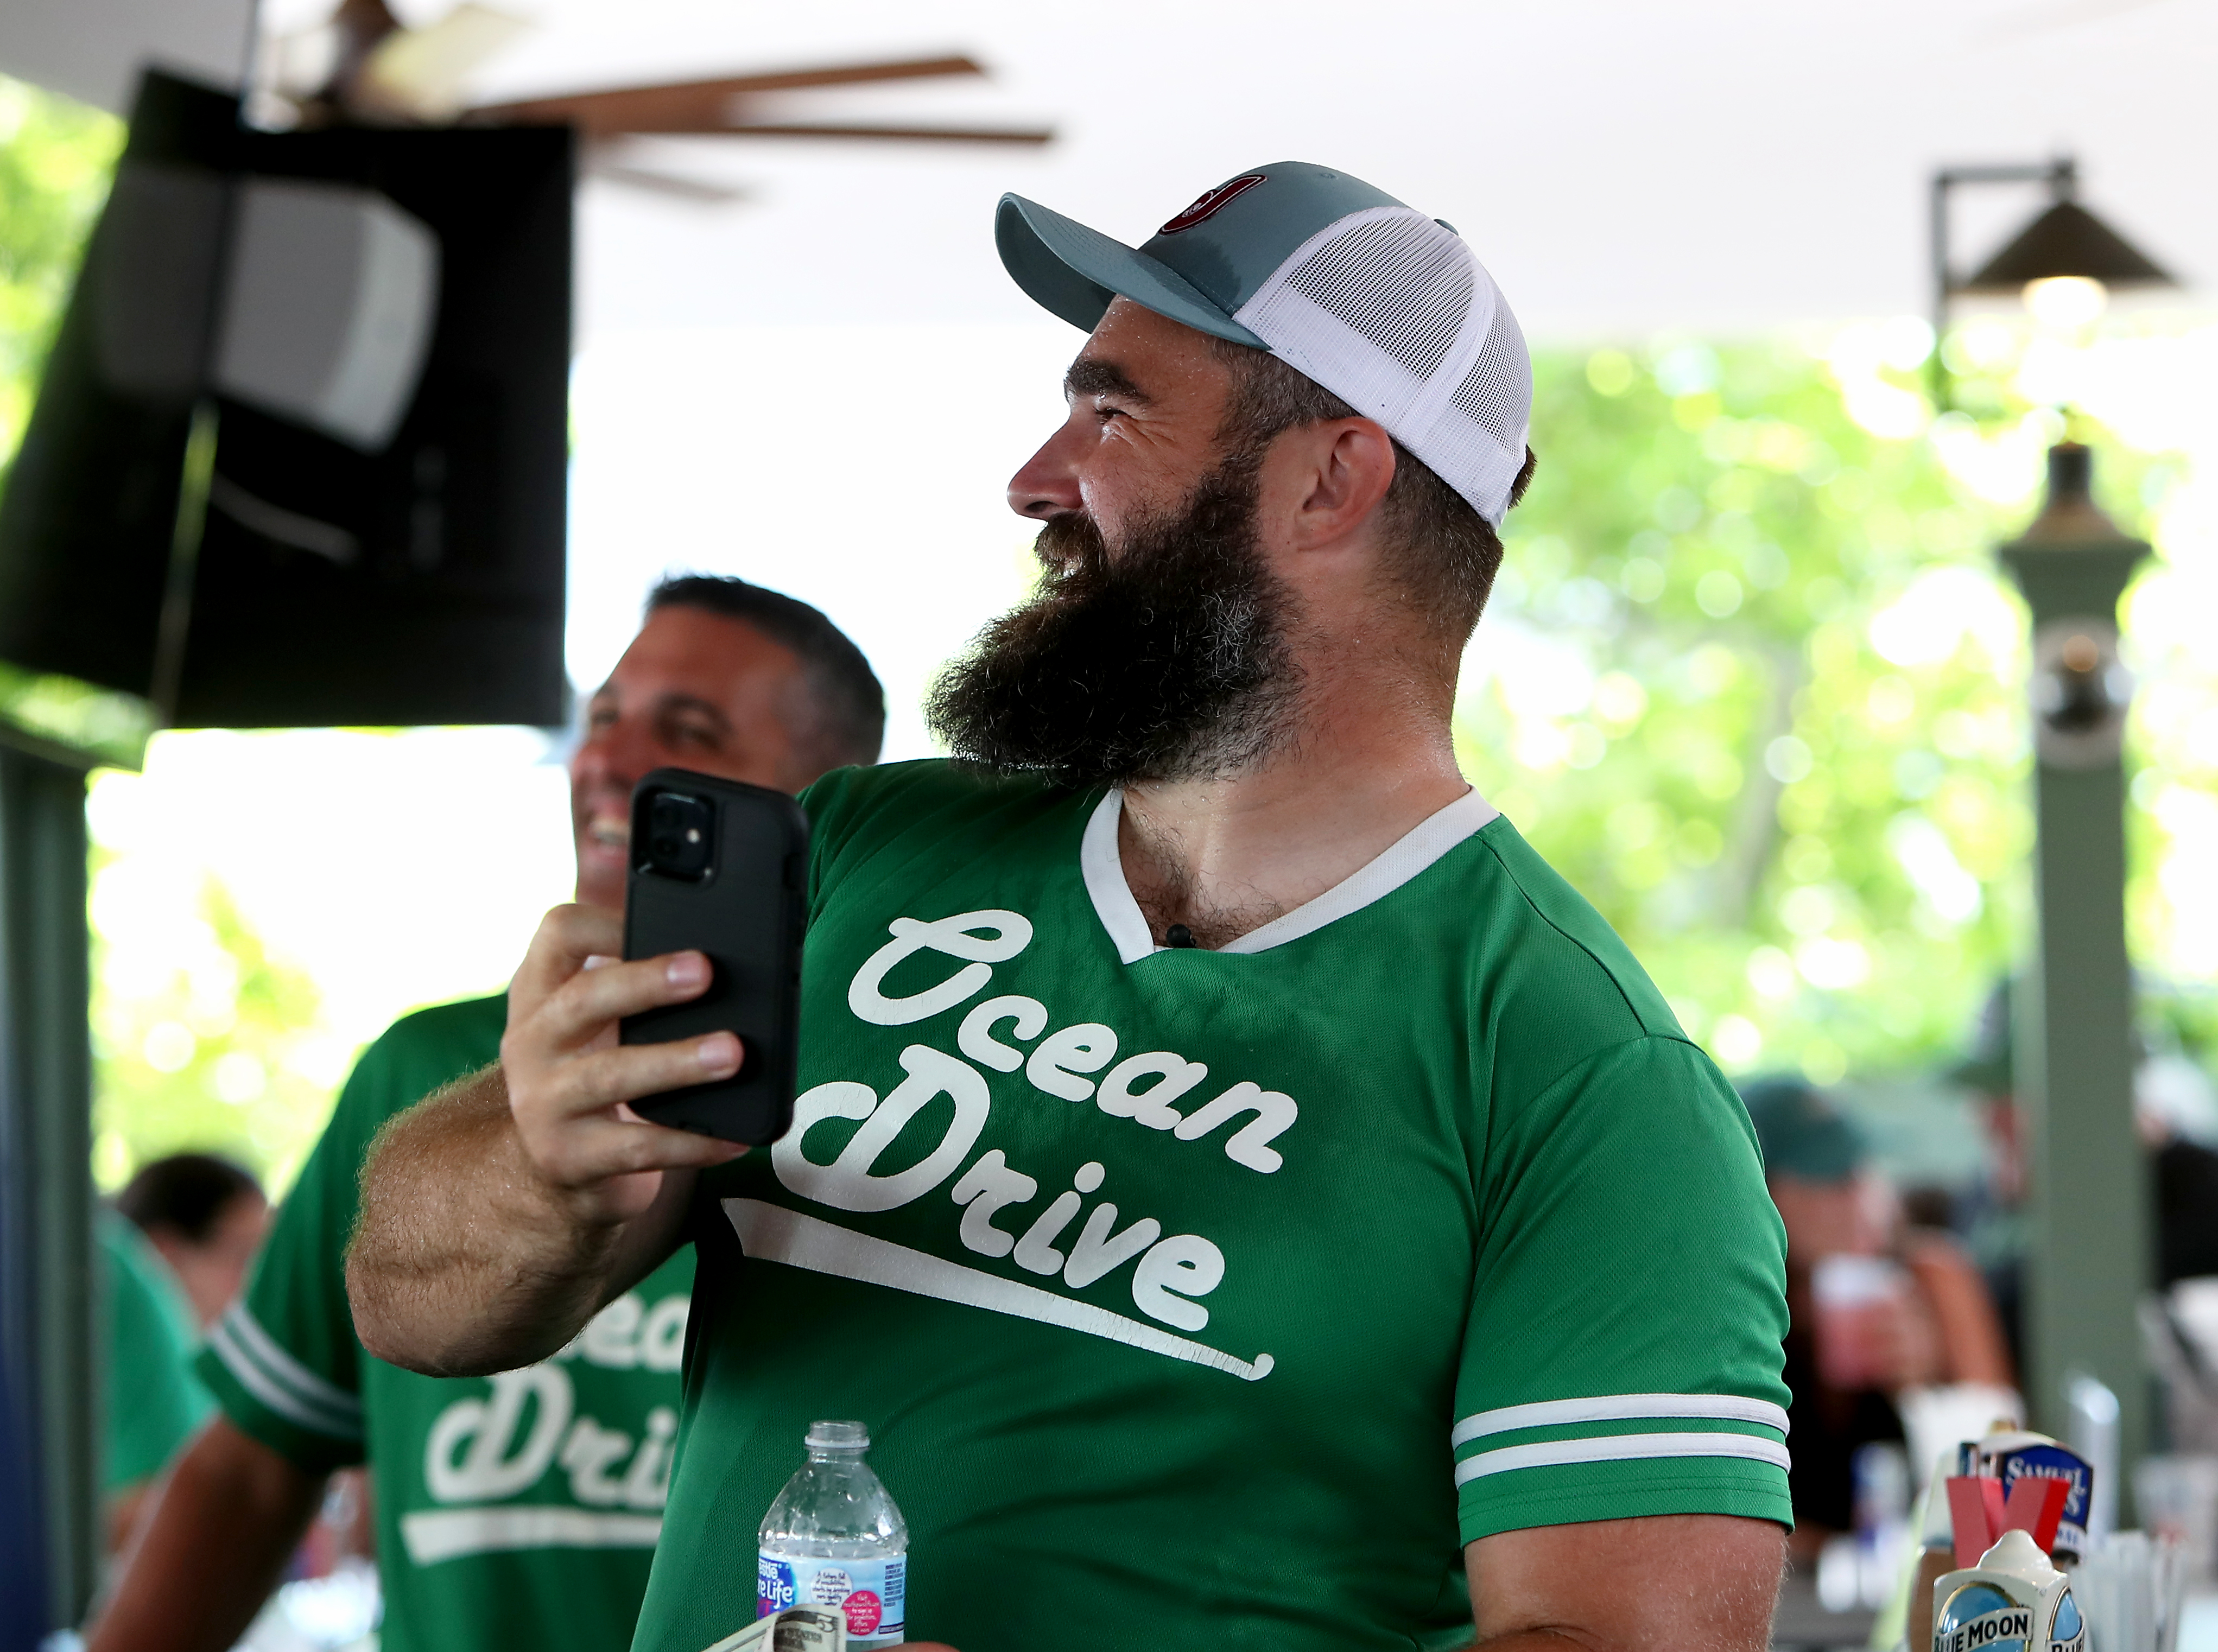 Jason Kelce, Other Eagles Land in Sea Isle